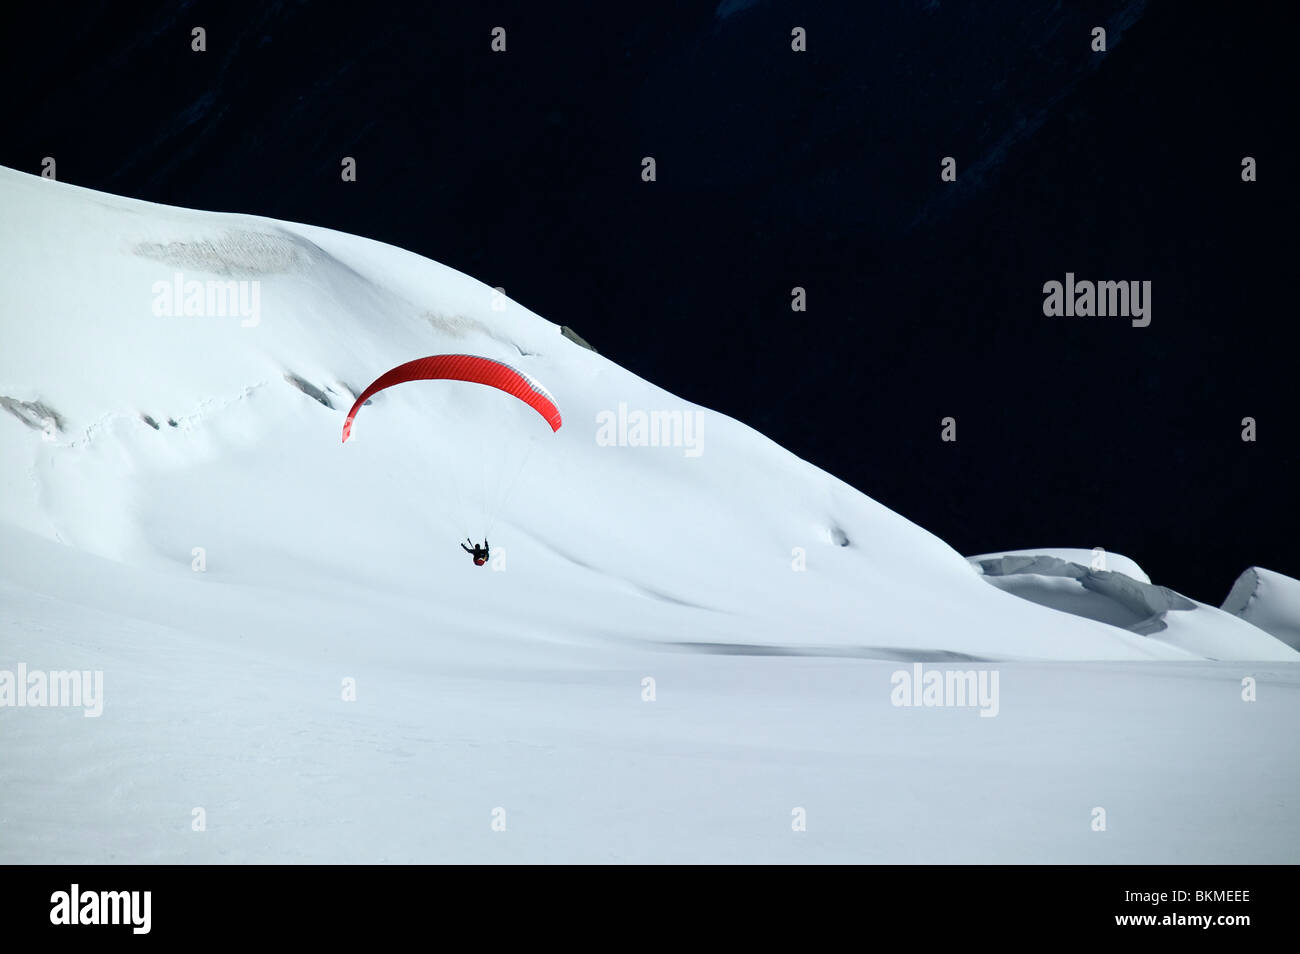 Hang glider coming in to land on snow covered mountain. Stock Photo